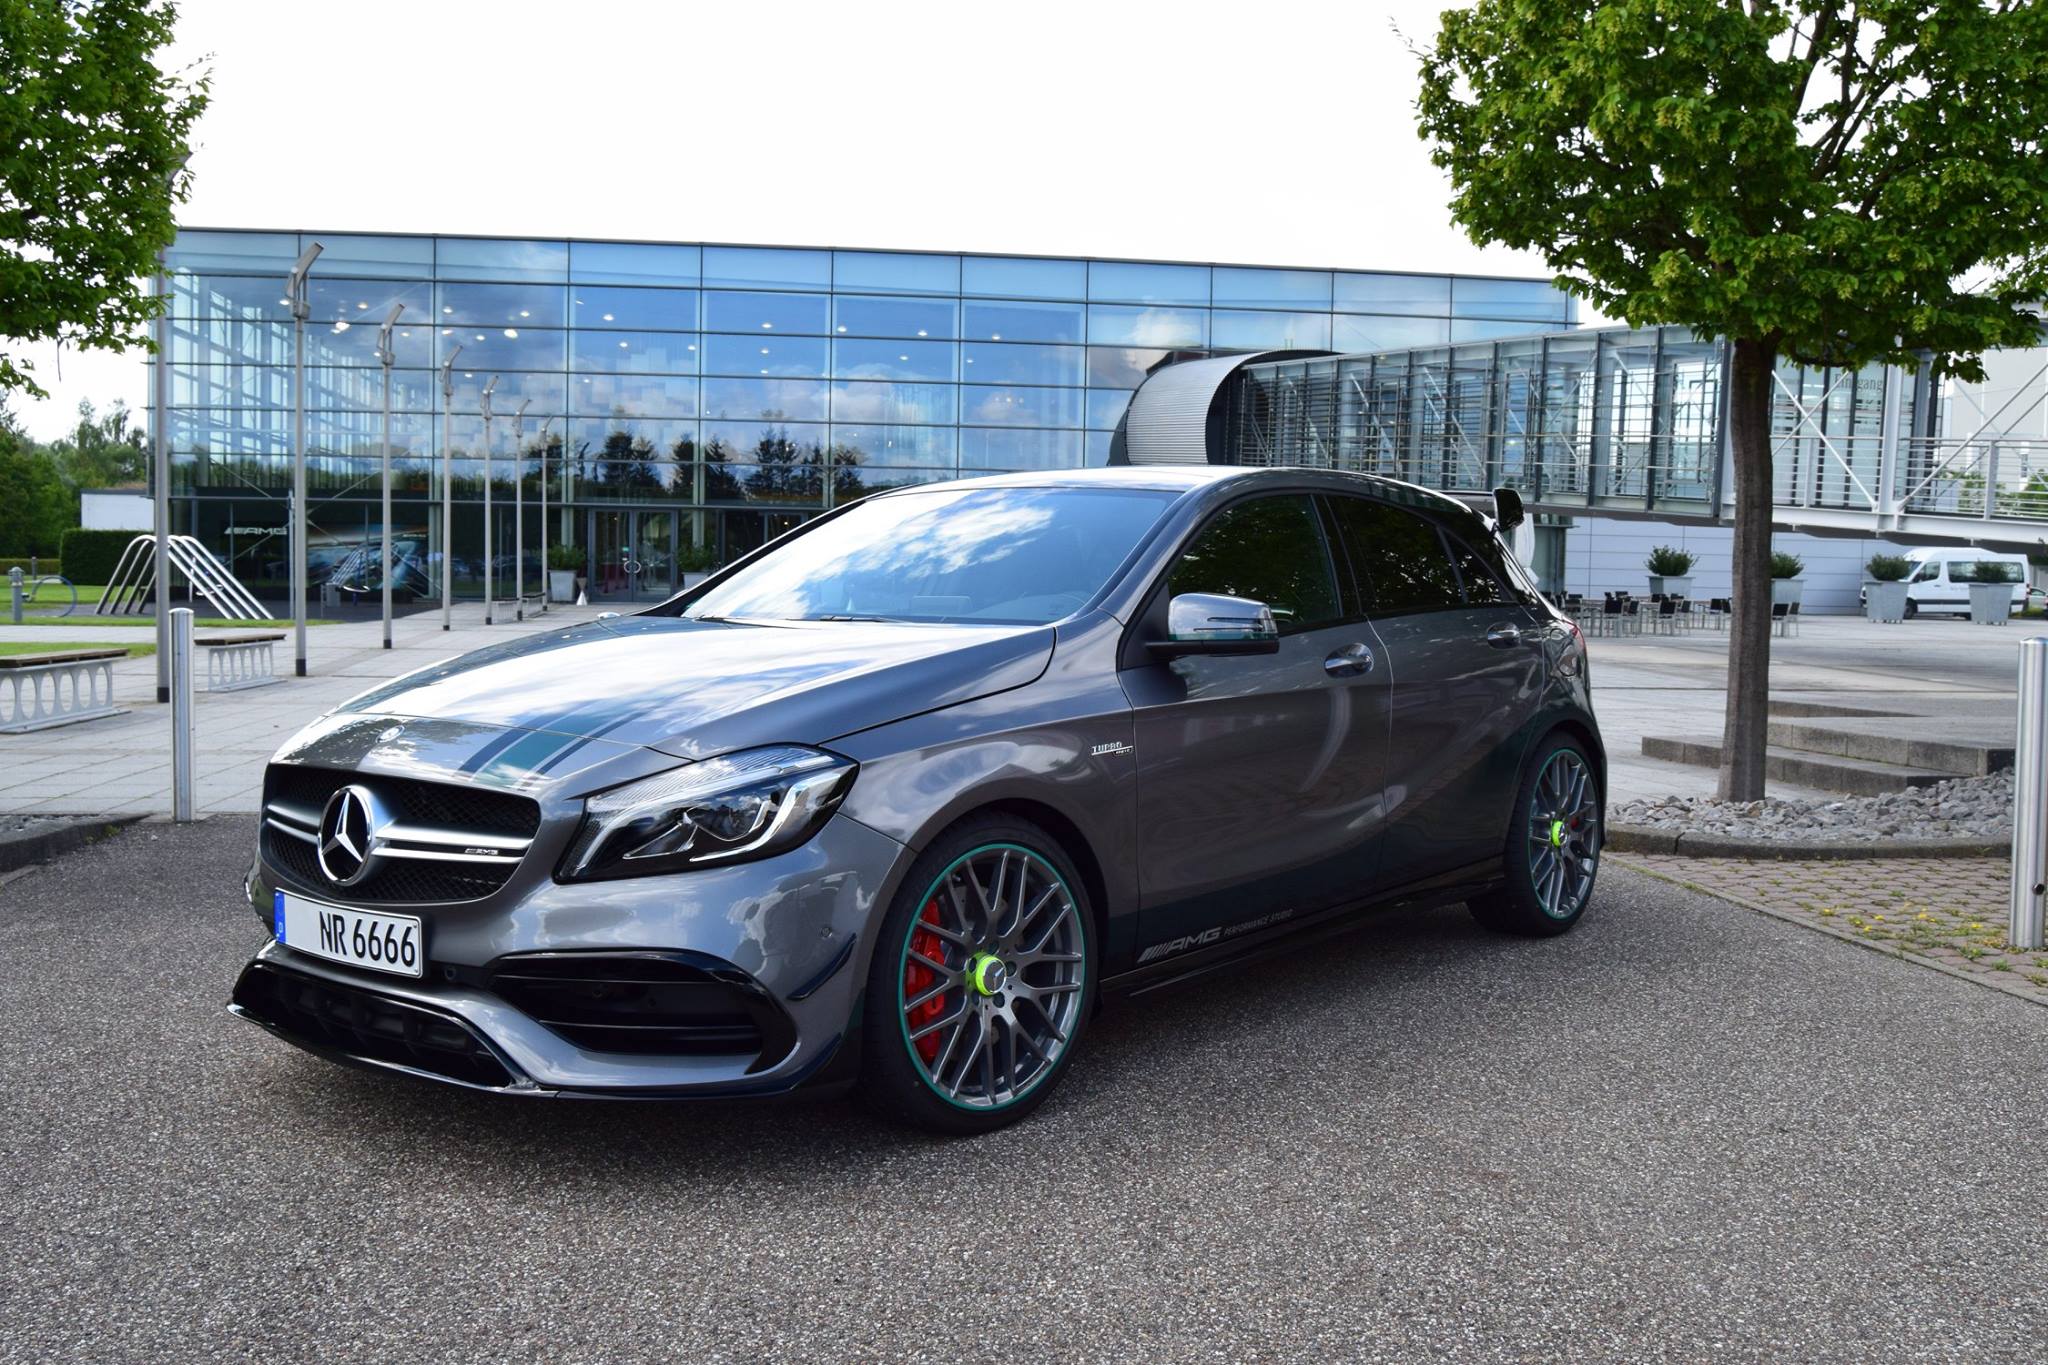 Mercedes-AMG on "One of the last Champion Edition' #A45. 📷 Kundencenter Rastatt [Consumption 7.3l/100km|CO₂ 171g/km] https://t.co/ncez60eRwB" Twitter